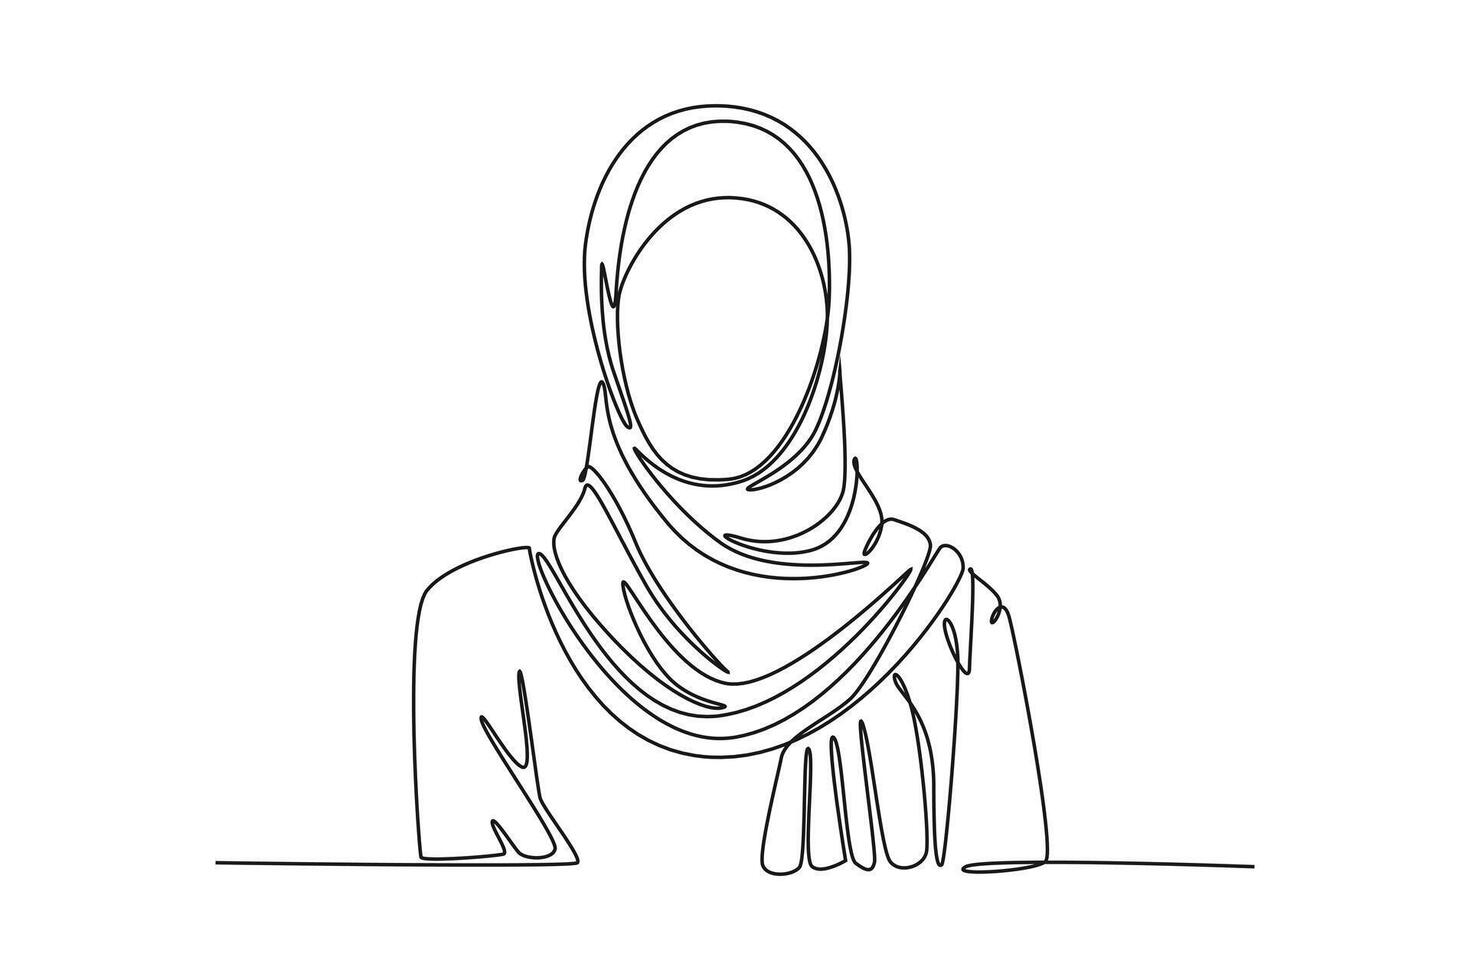 Continuous one line drawing stylish and trendy hijab woman concept. Doodle illustration. vector